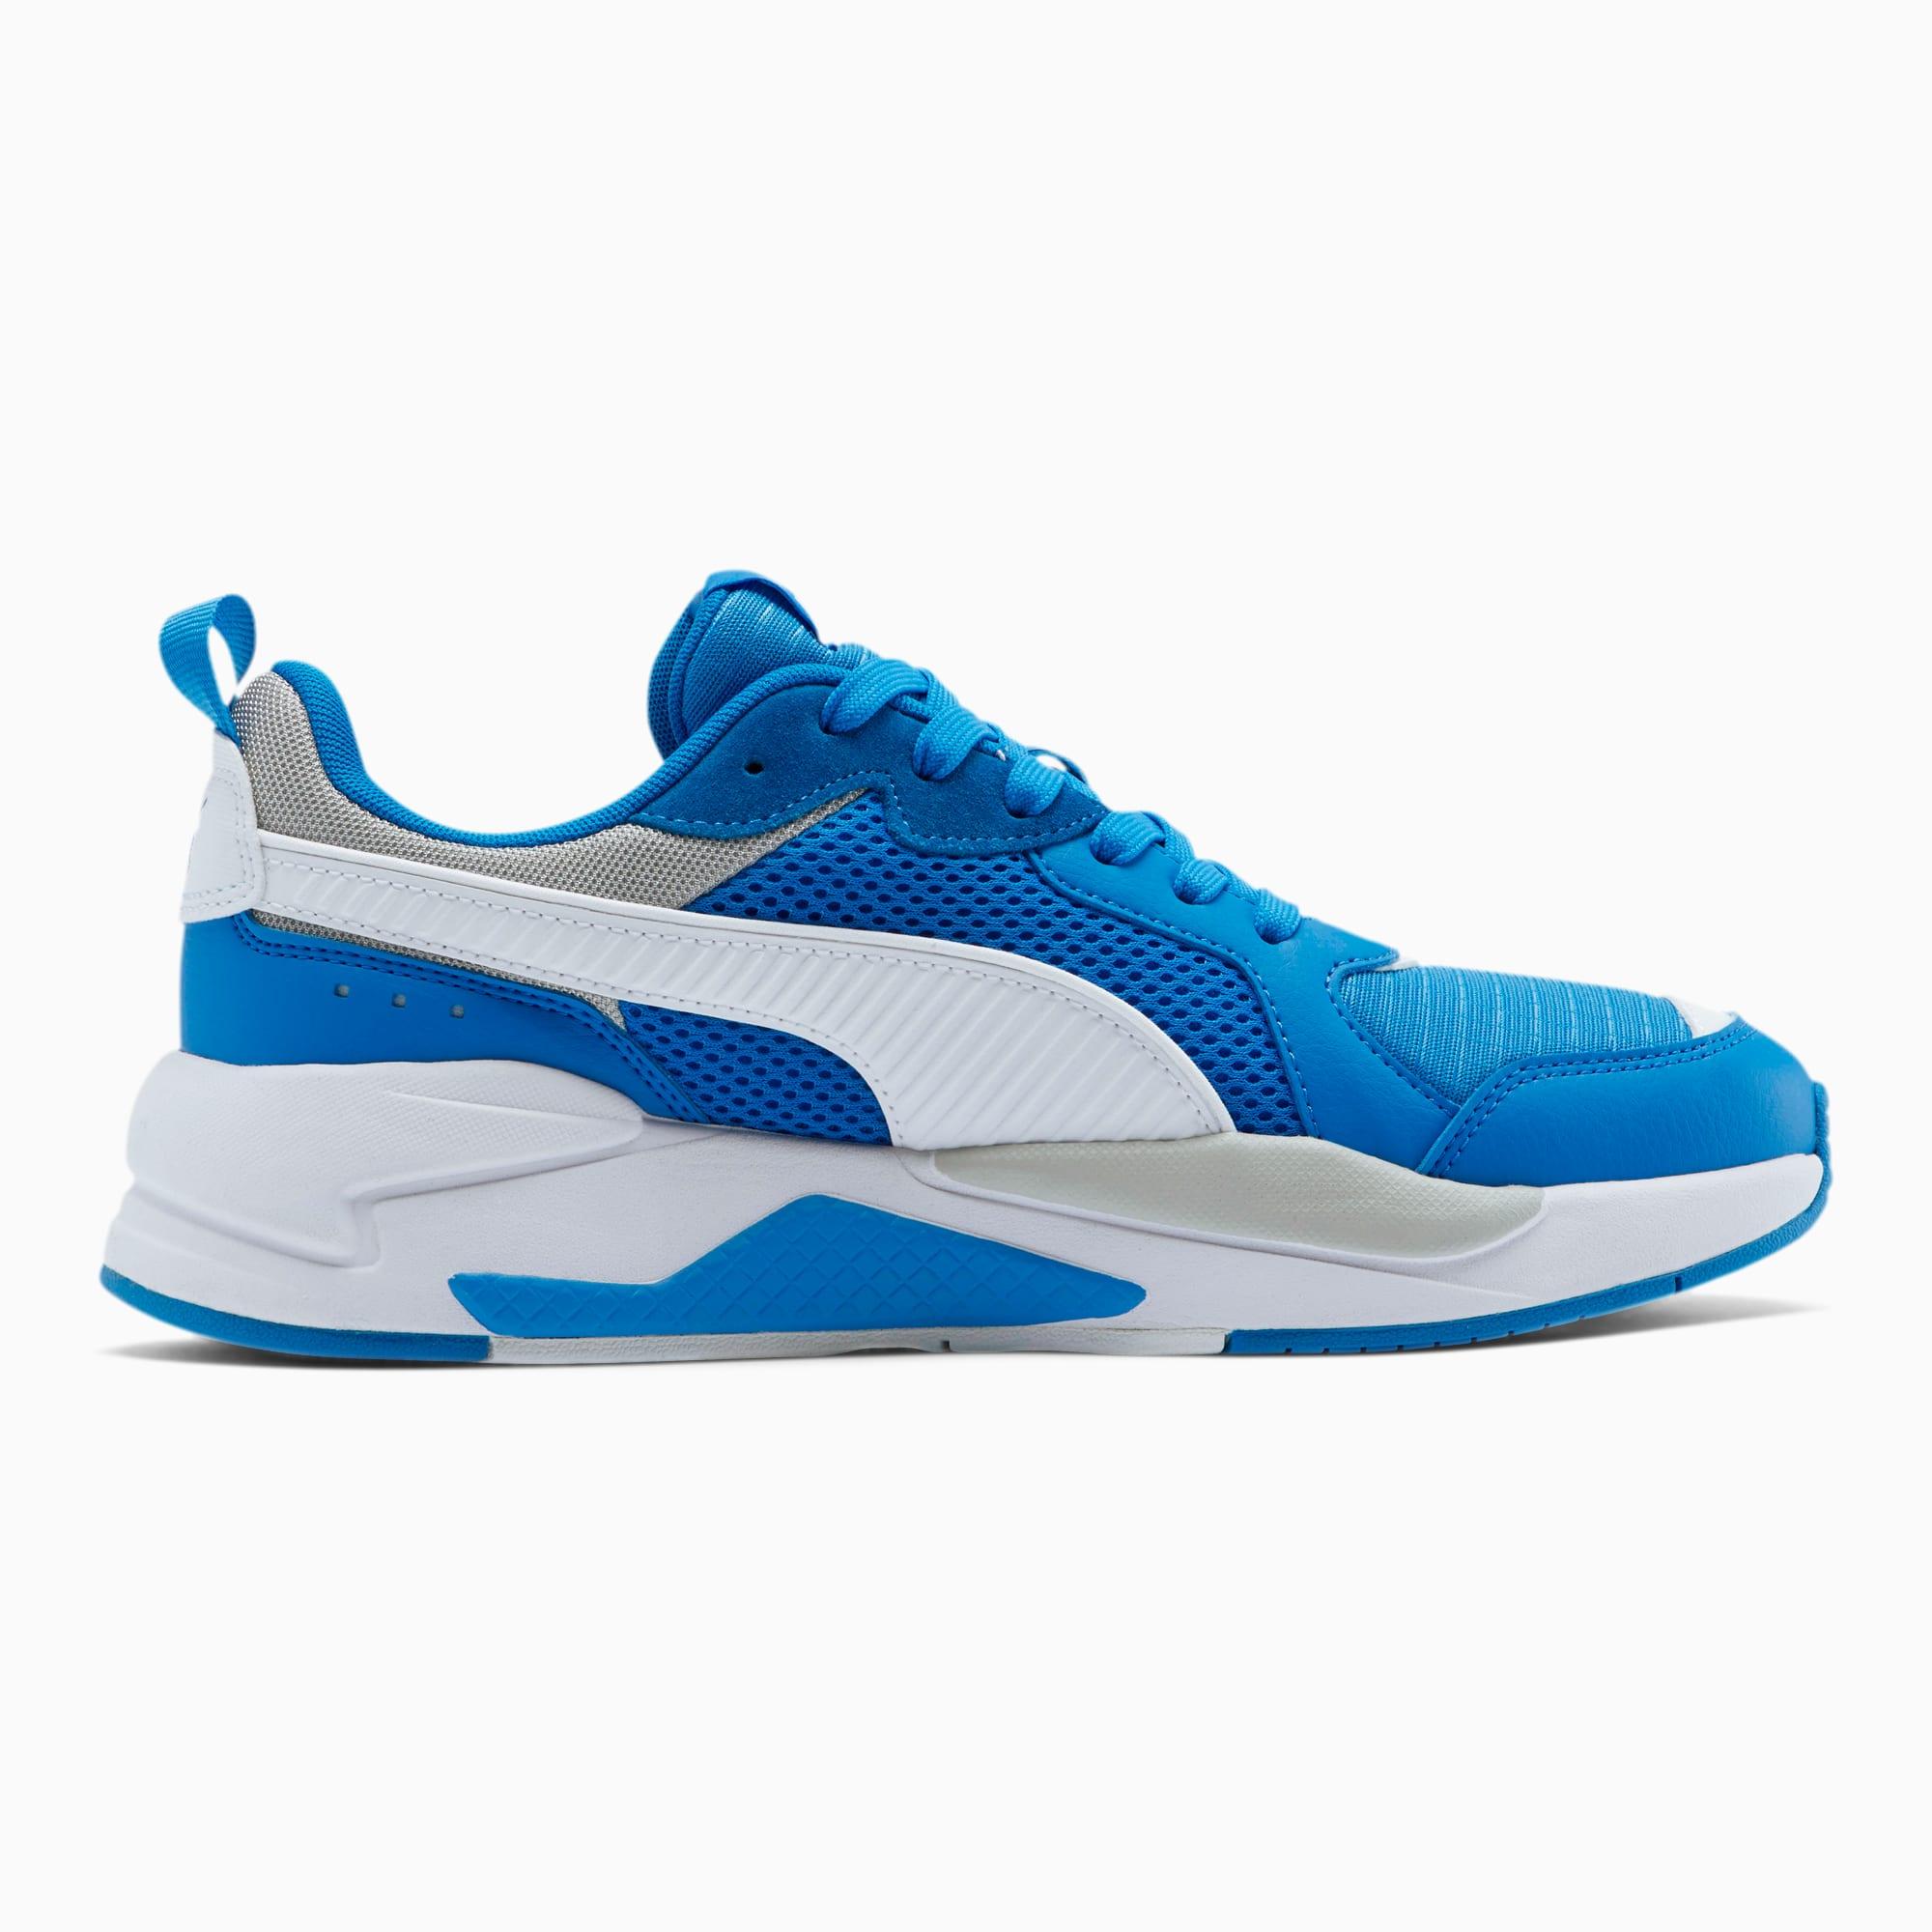 PUMA Suede X-ray Colorblock Sneakers in Blue for Men - Lyst